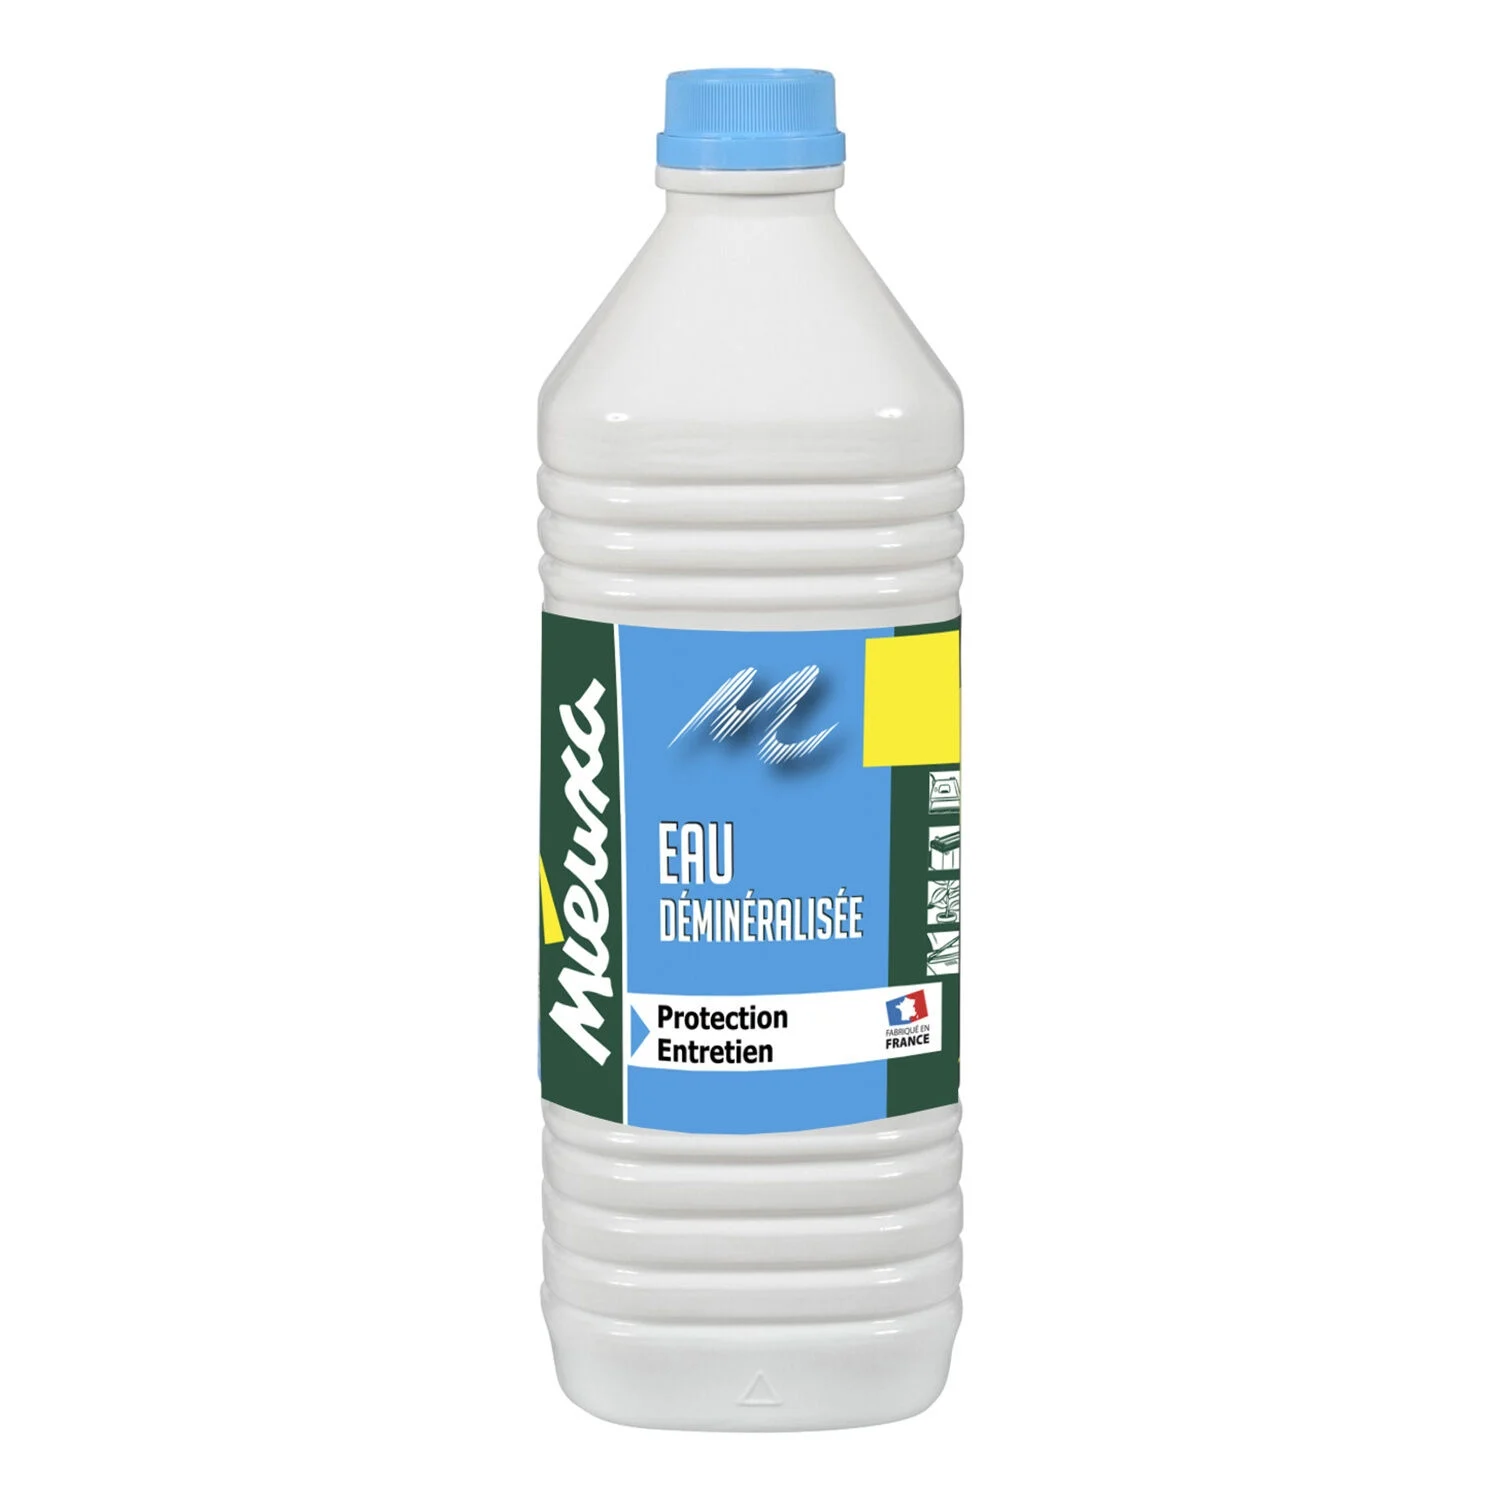 Demineralized Water Protection, Maintenance 1 Liter - Mieuxa